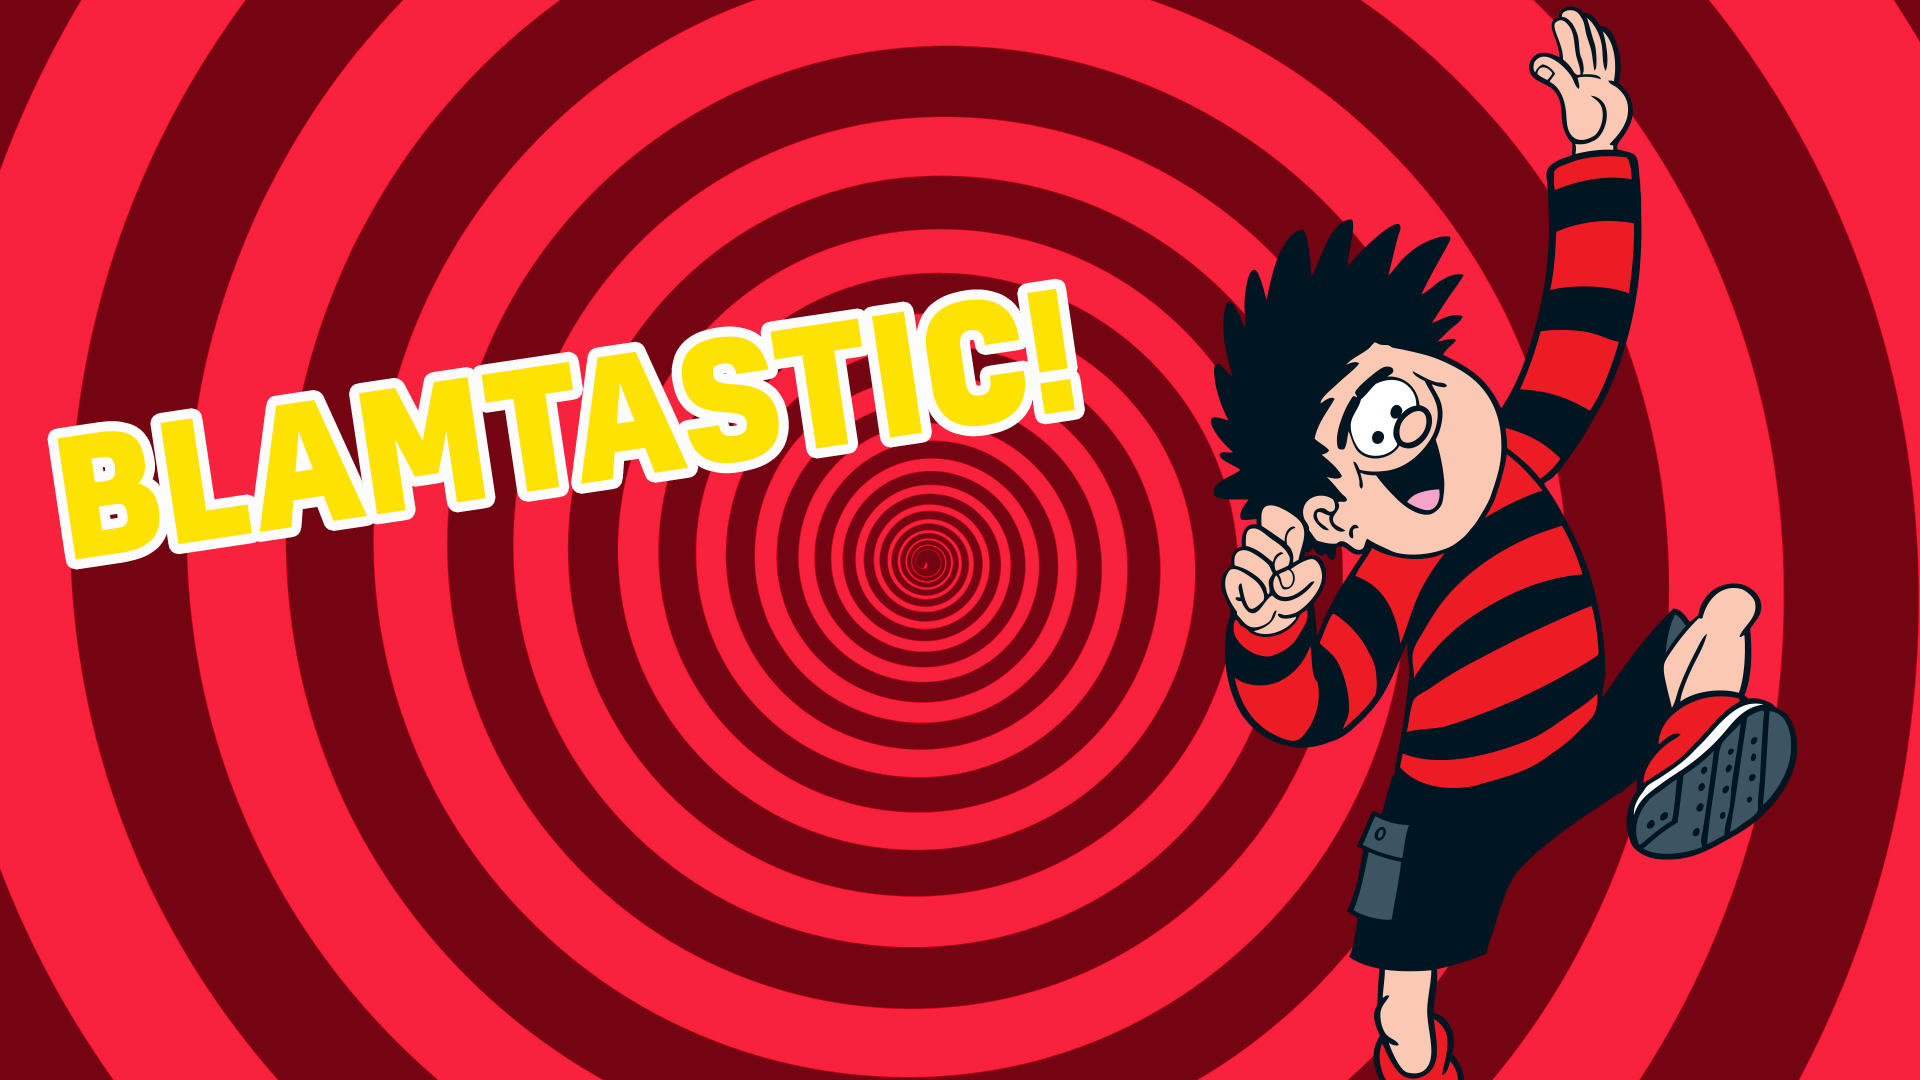 Blamtastic! You know more Beano quotes than Dennis himself! A perfect score to celebrate with!